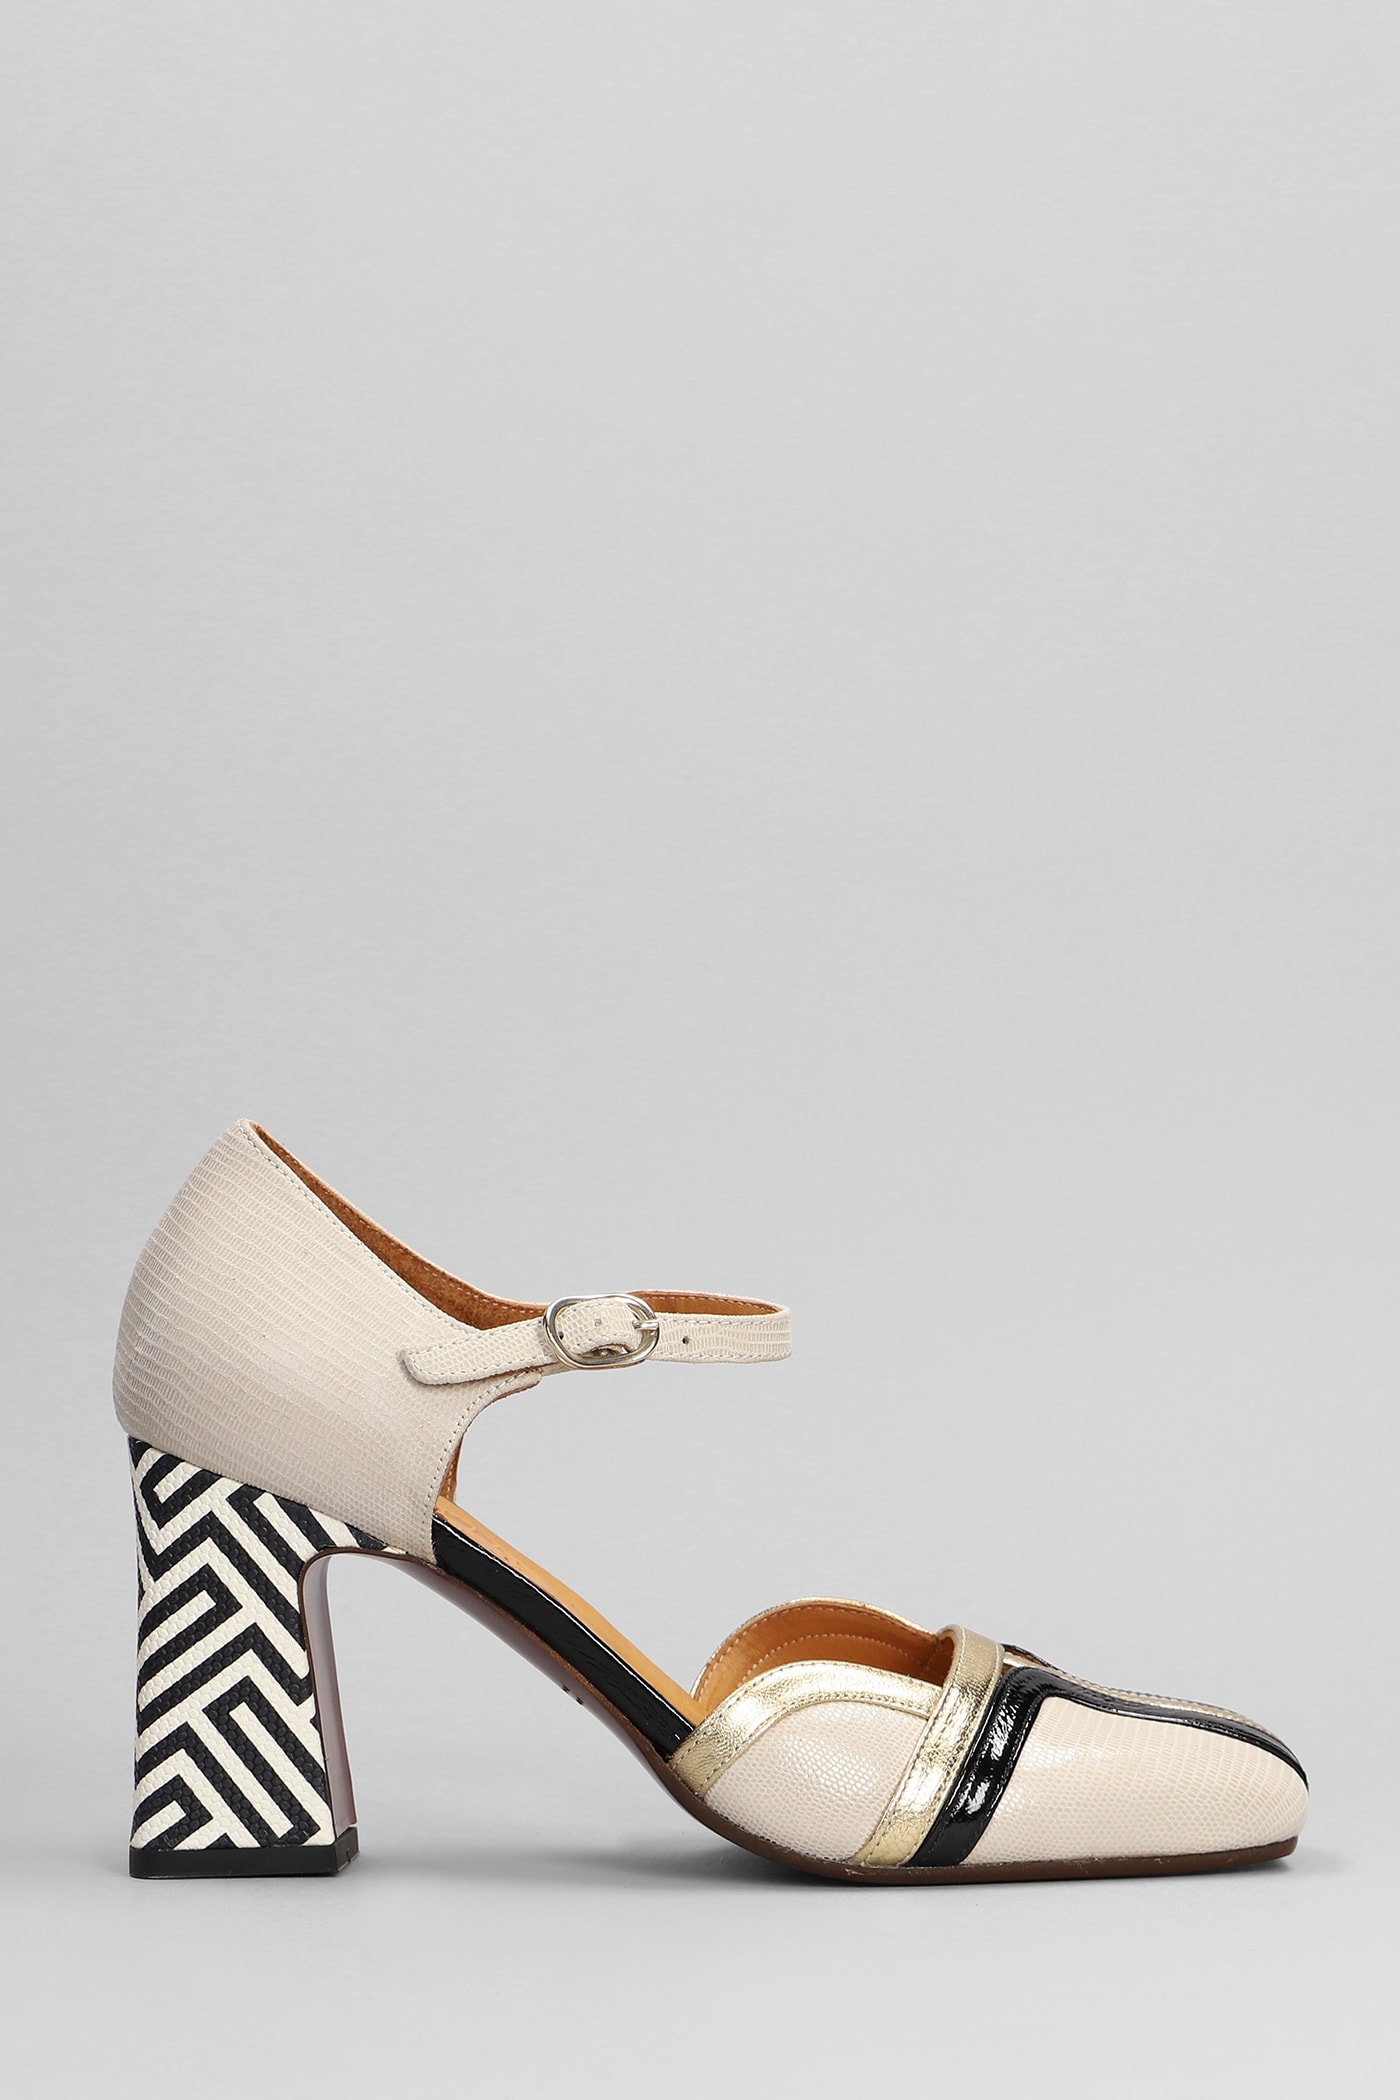 CHIE MIHARA OLALI PUMPS IN BEIGE LEATHER